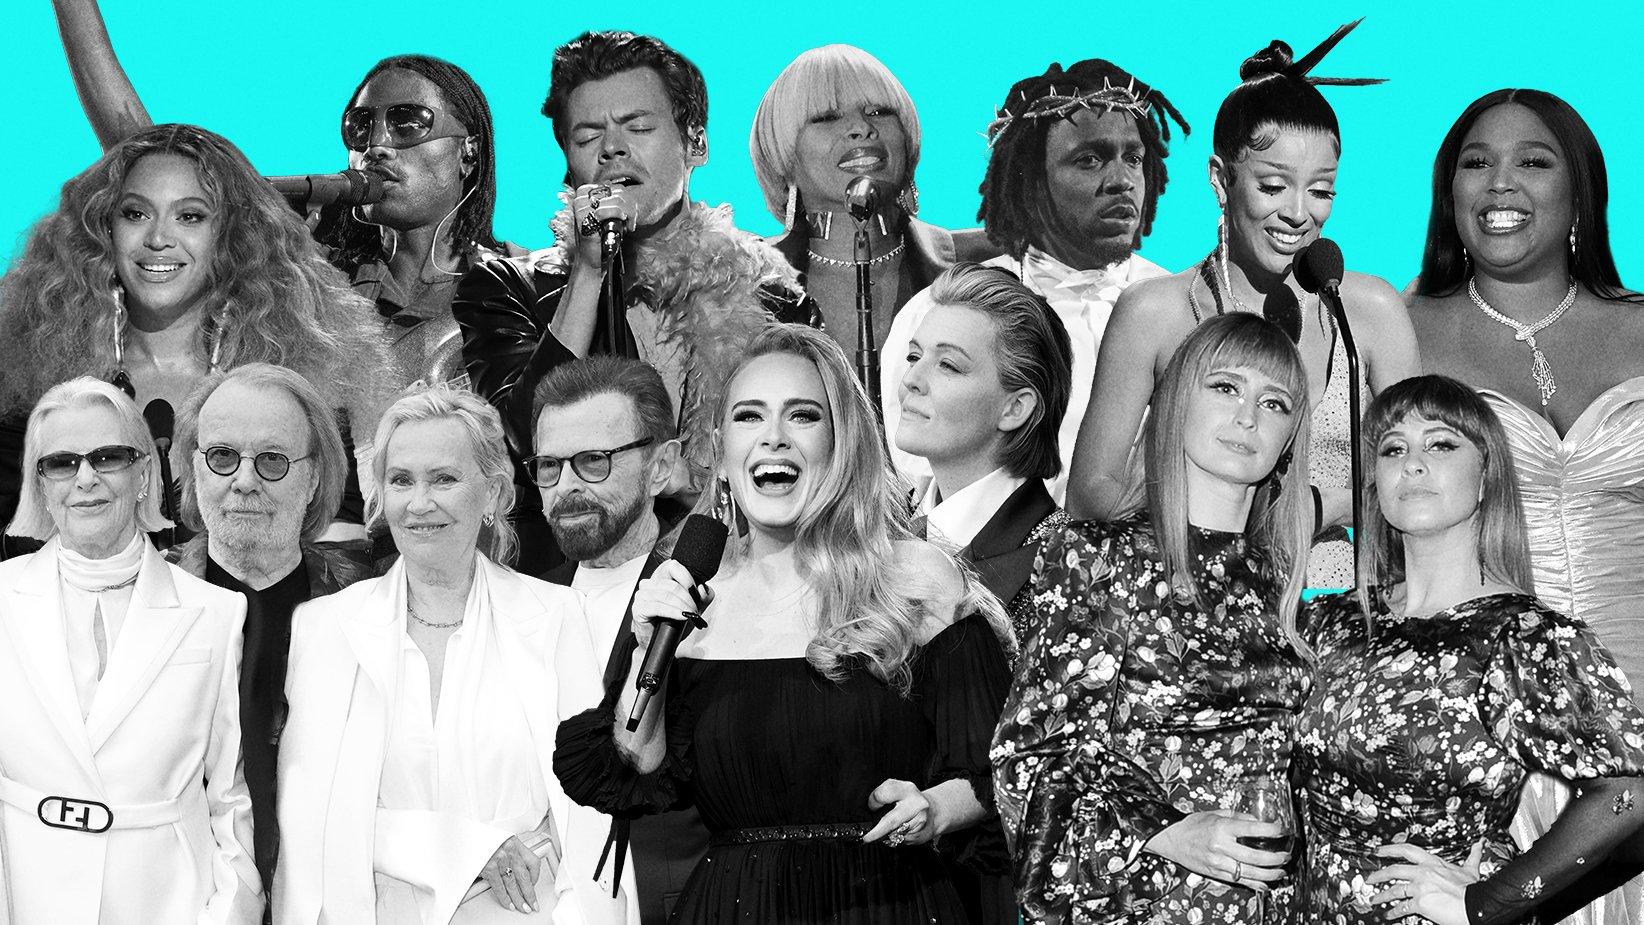 Meet The Record Of The Year Nominees At The 2023 GRAMMYs GRAMMY image